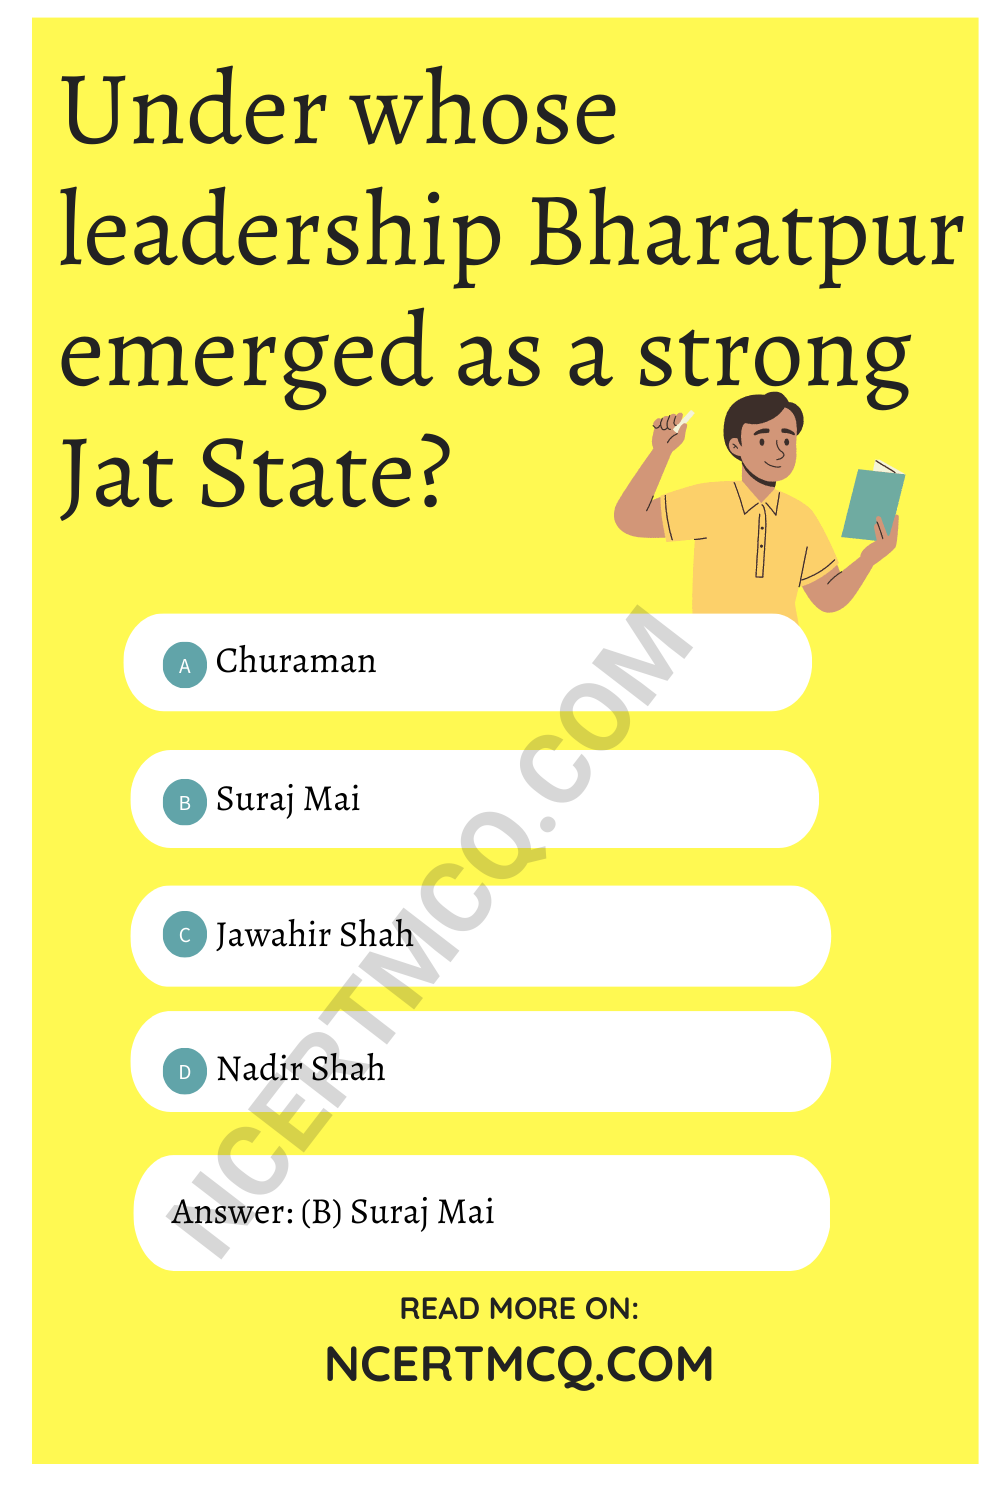 Under whose leadership Bharatpur emerged as a strong Jat State?